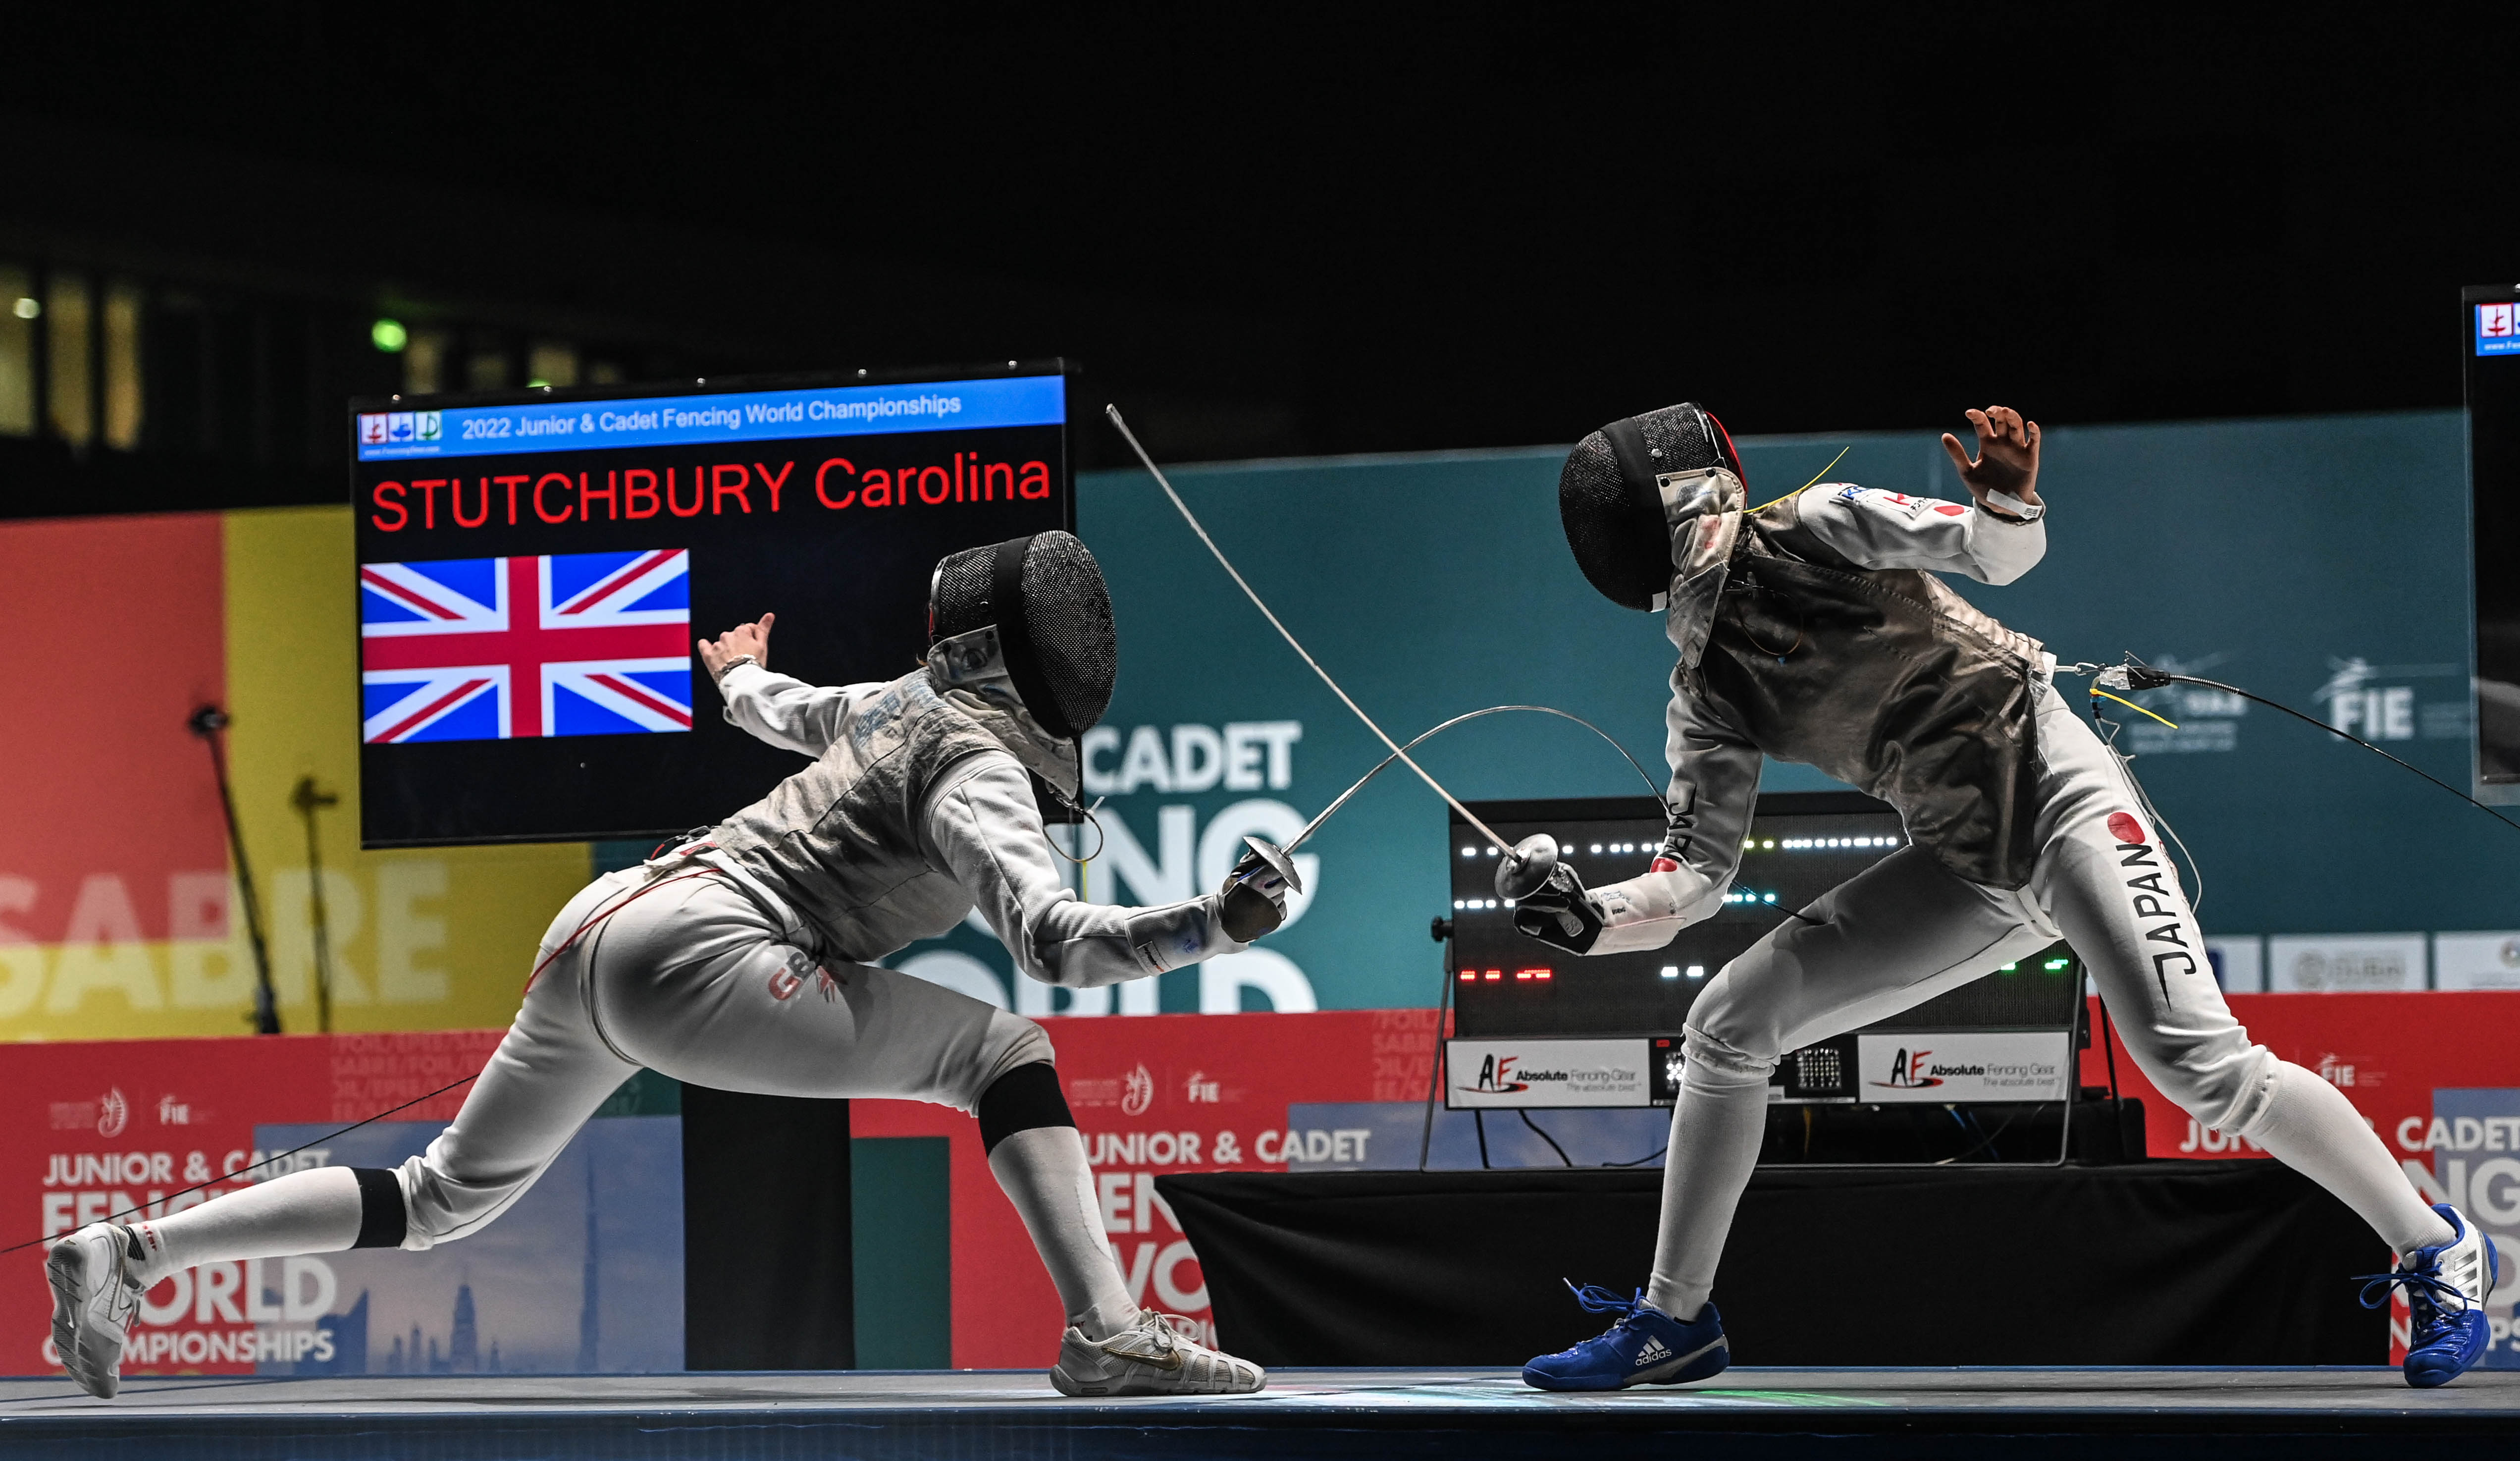 Stutchbury fences against Nagase from Japan in the semi finals of the Cadet women's foil event in Dubai 2022